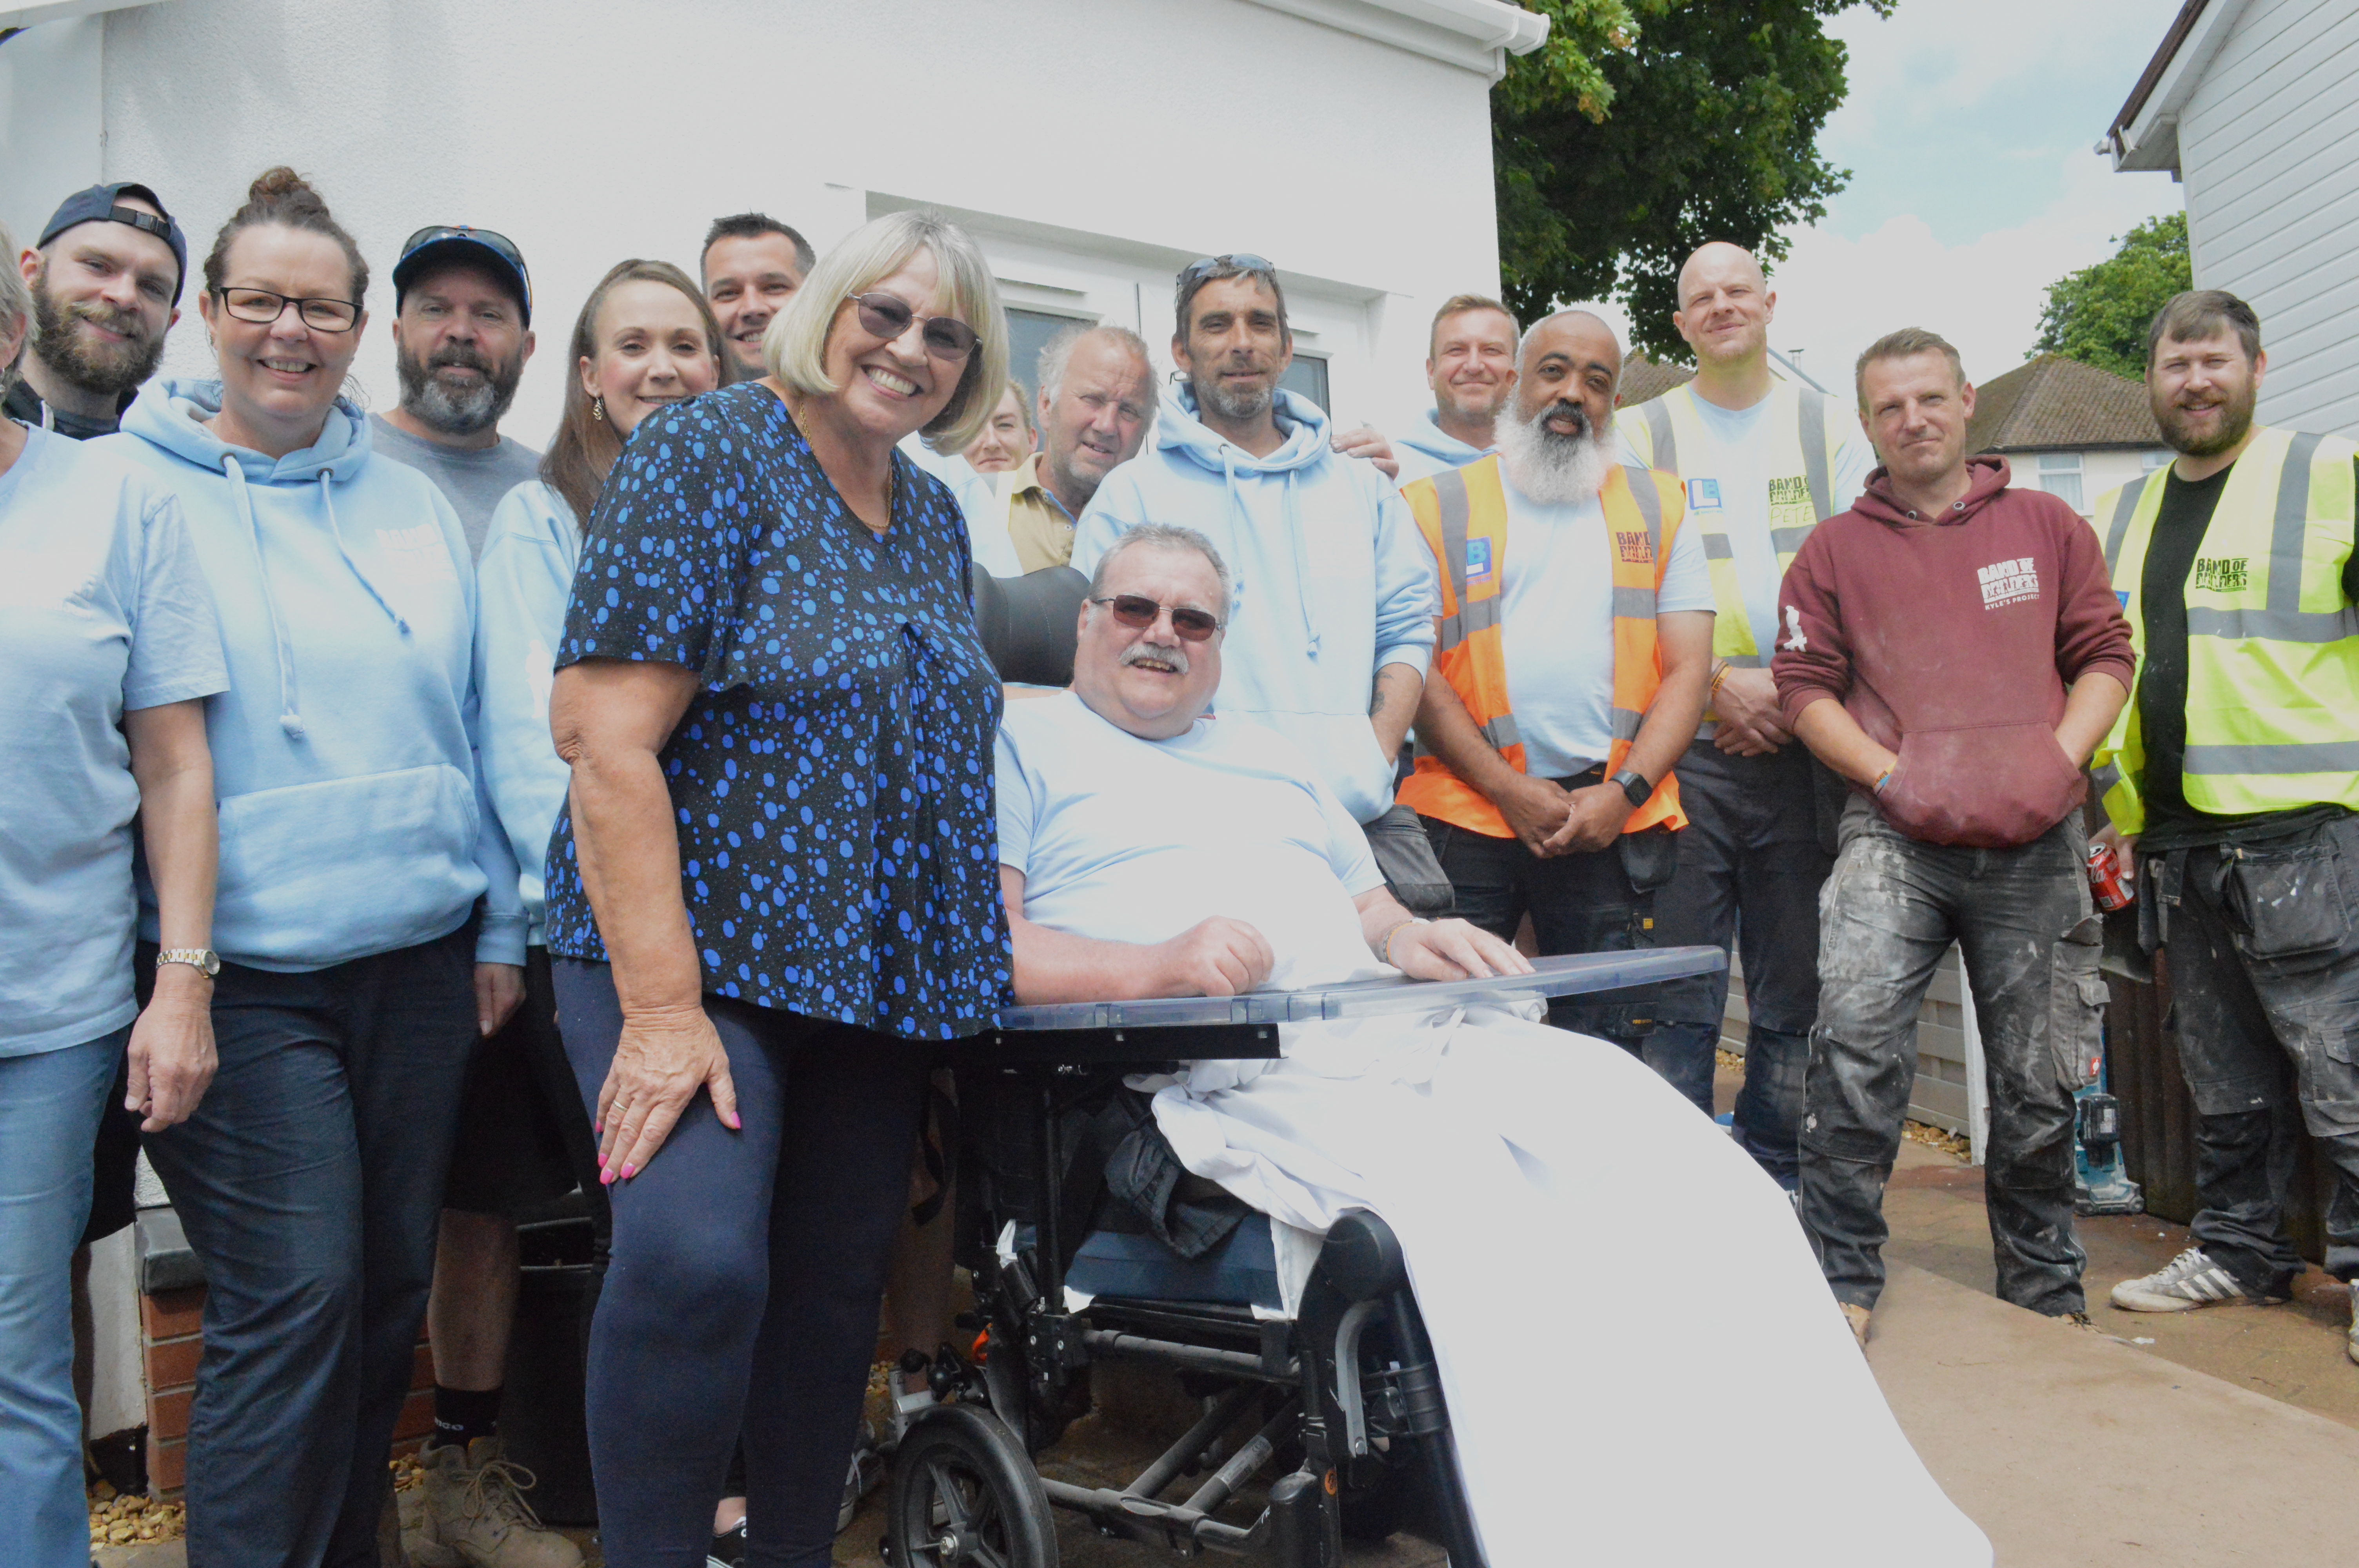 Linda and Keith Parry's home has been transformed thanks to the charity Band of Builders (Band of Builders/PA)